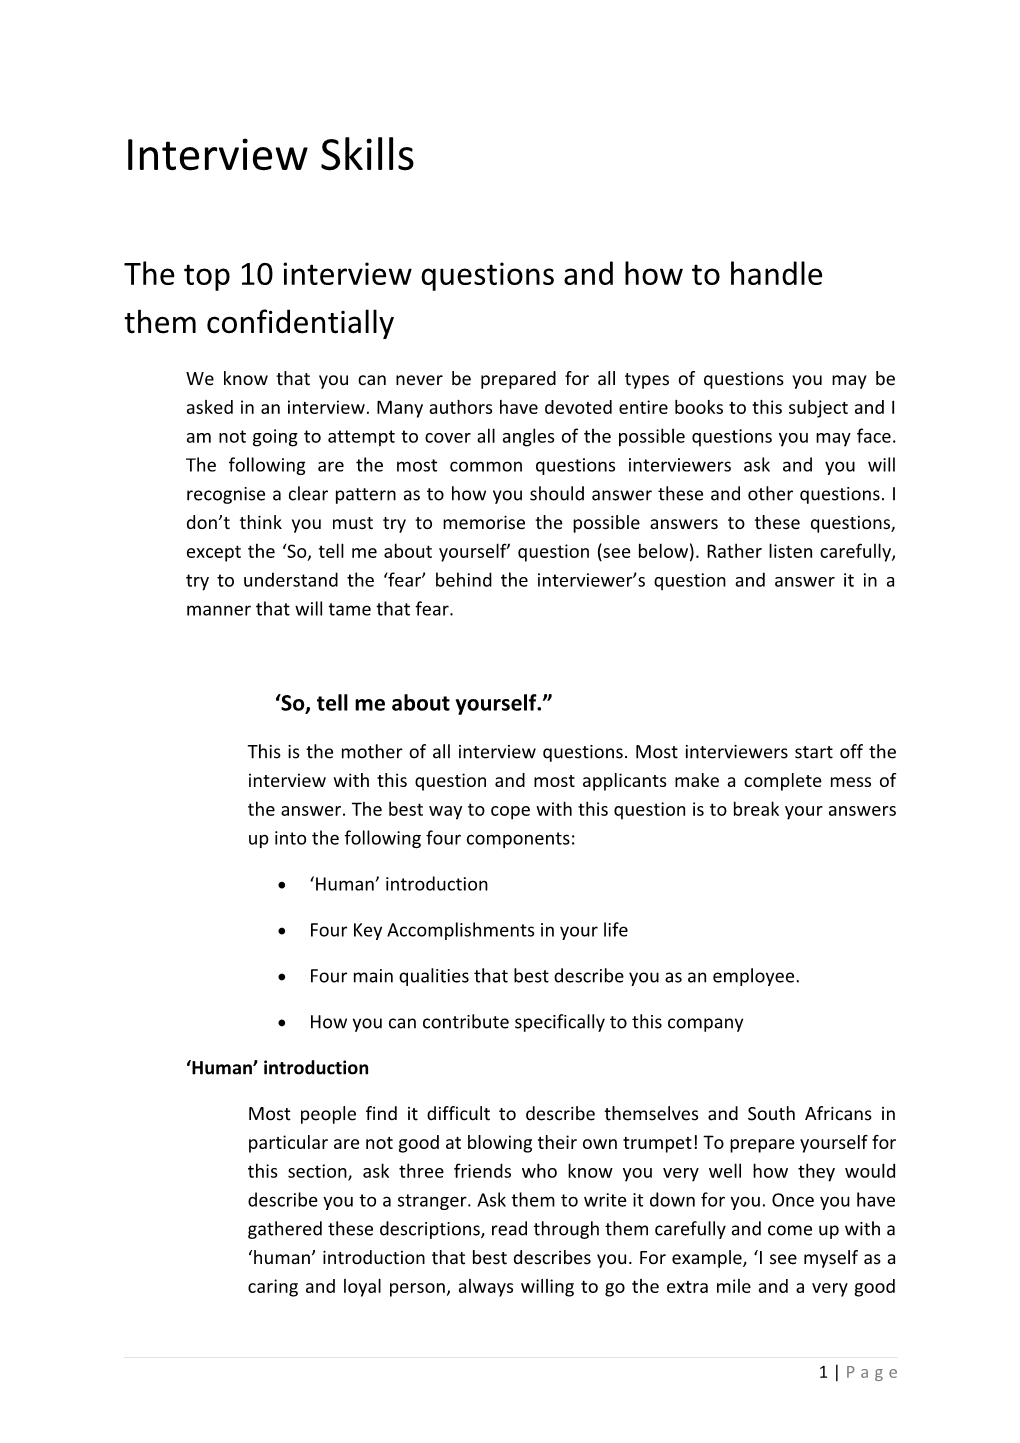 The Top 10 Interview Questions and How to Handle Them Confidentially